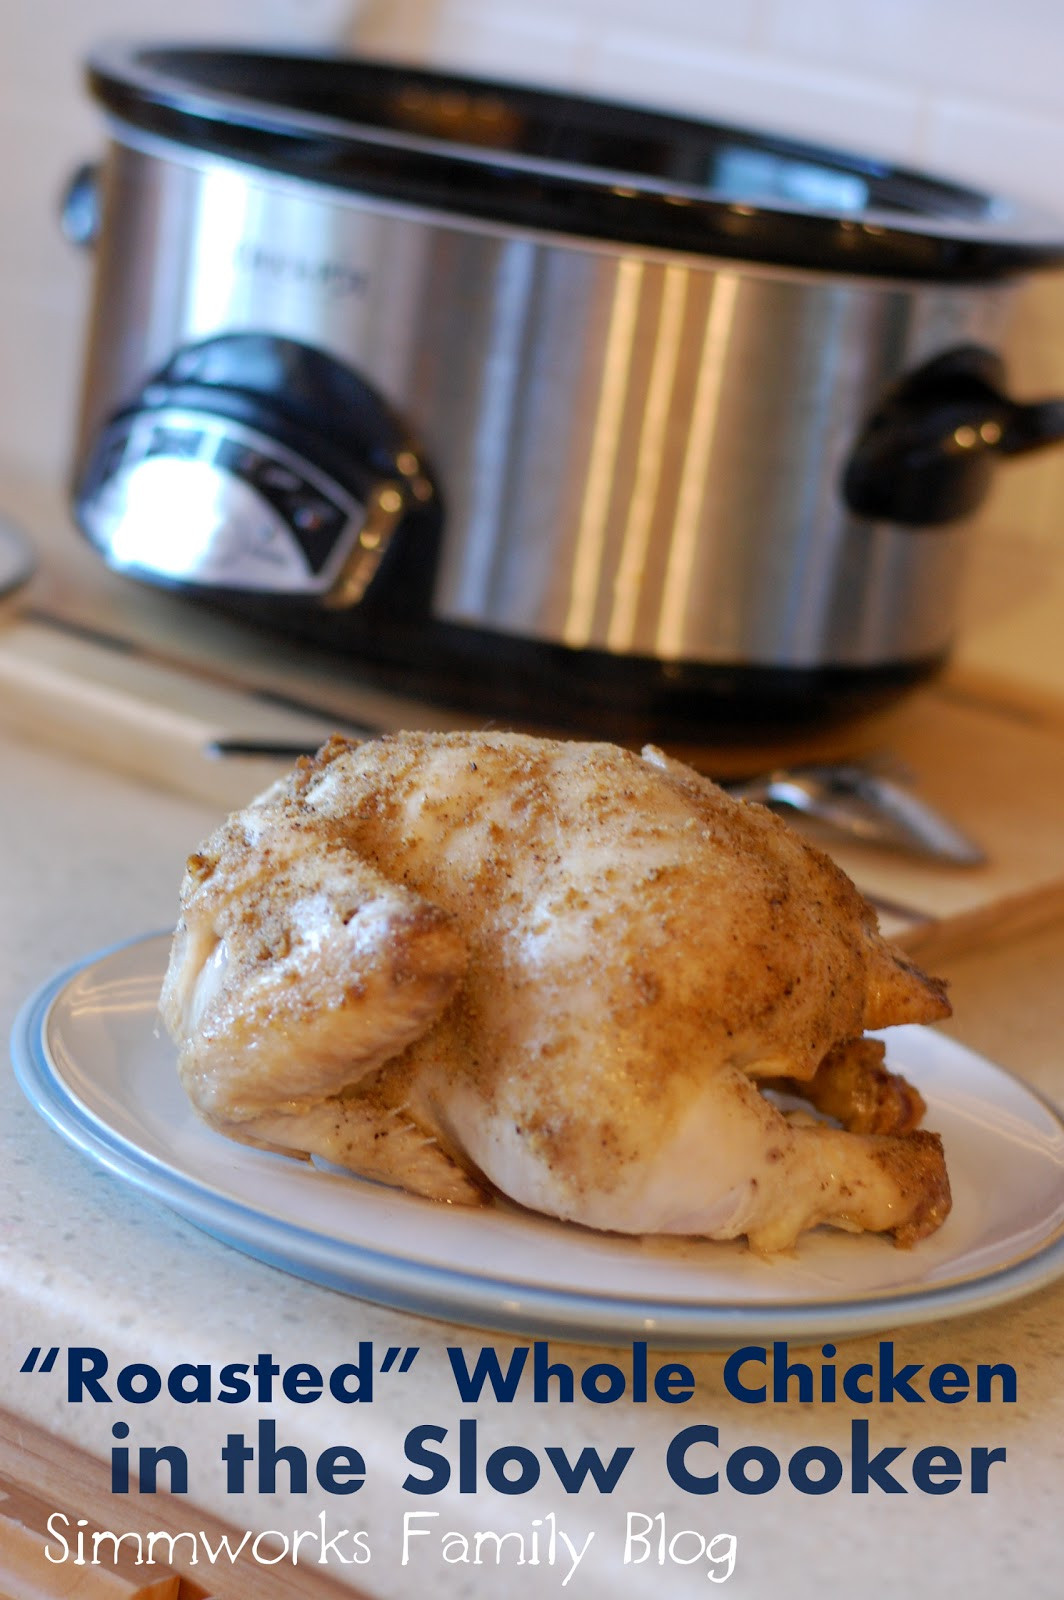 Slow Cooker Whole Roast Chicken
 "Roasted" Whole Chicken Slow Cooker Dinner Recipe A